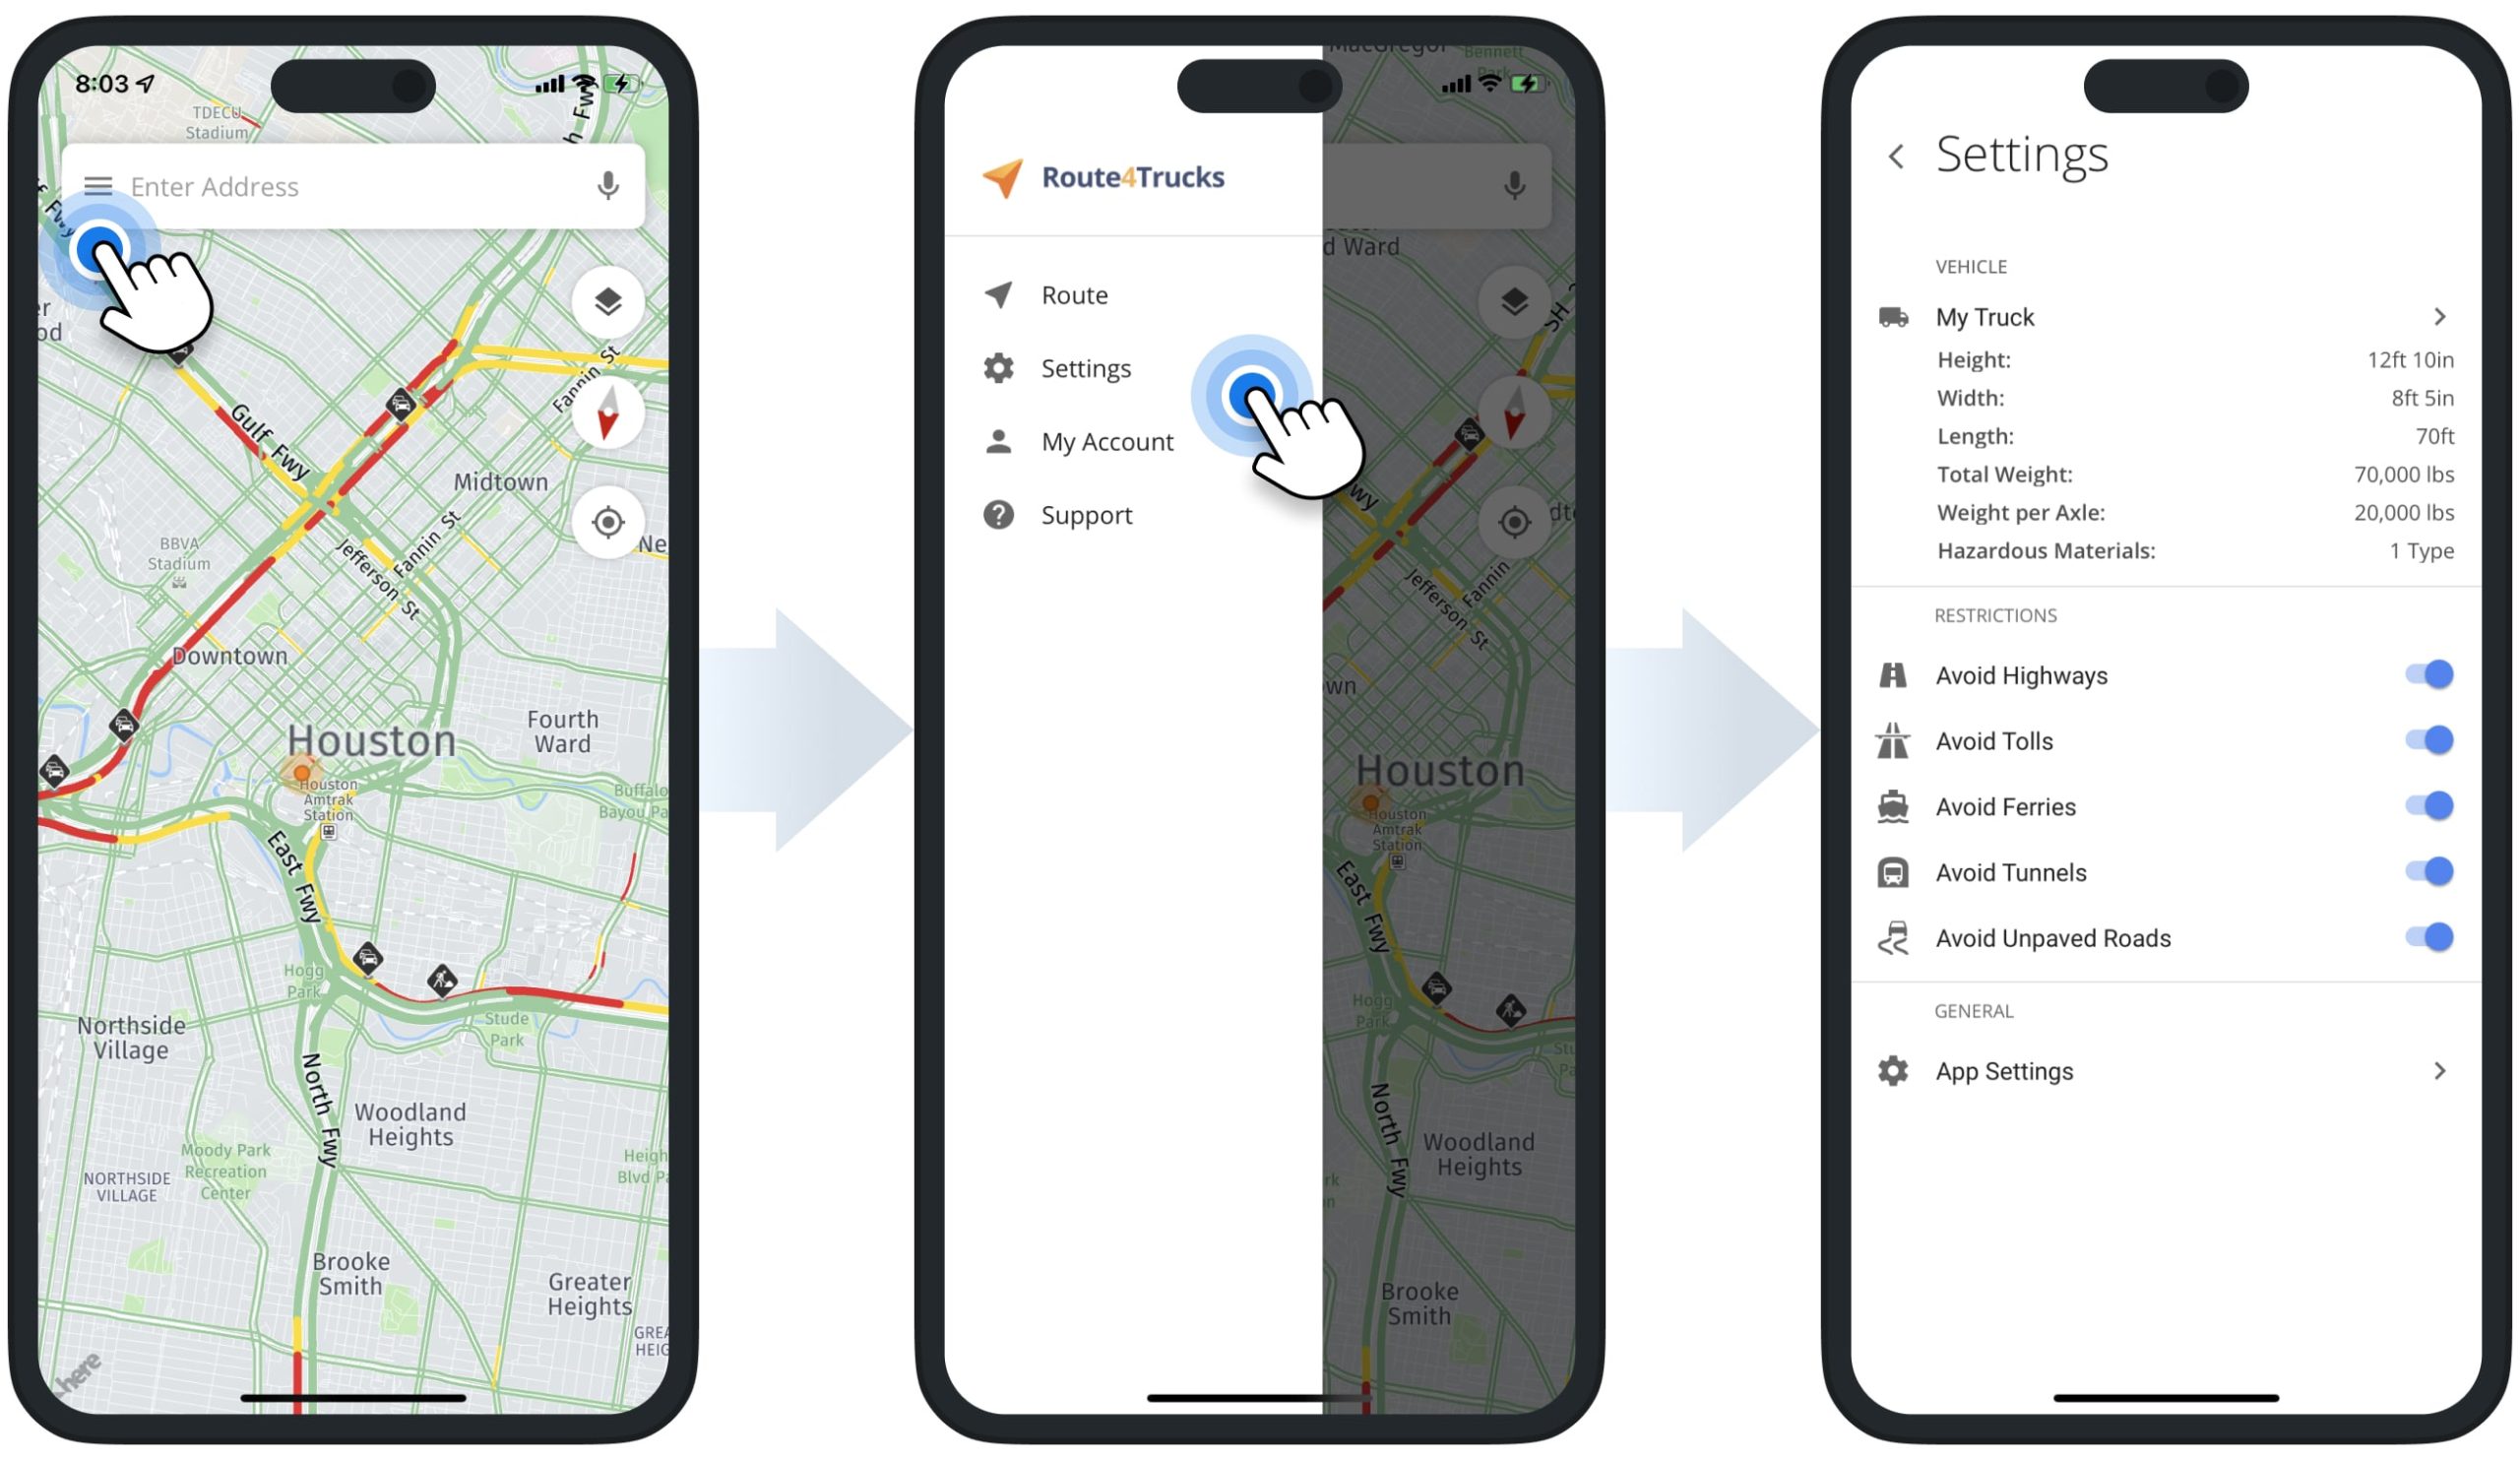 Route4Trucks app settings, commercial vehicle profiles, road restrictions, account, and subscription.